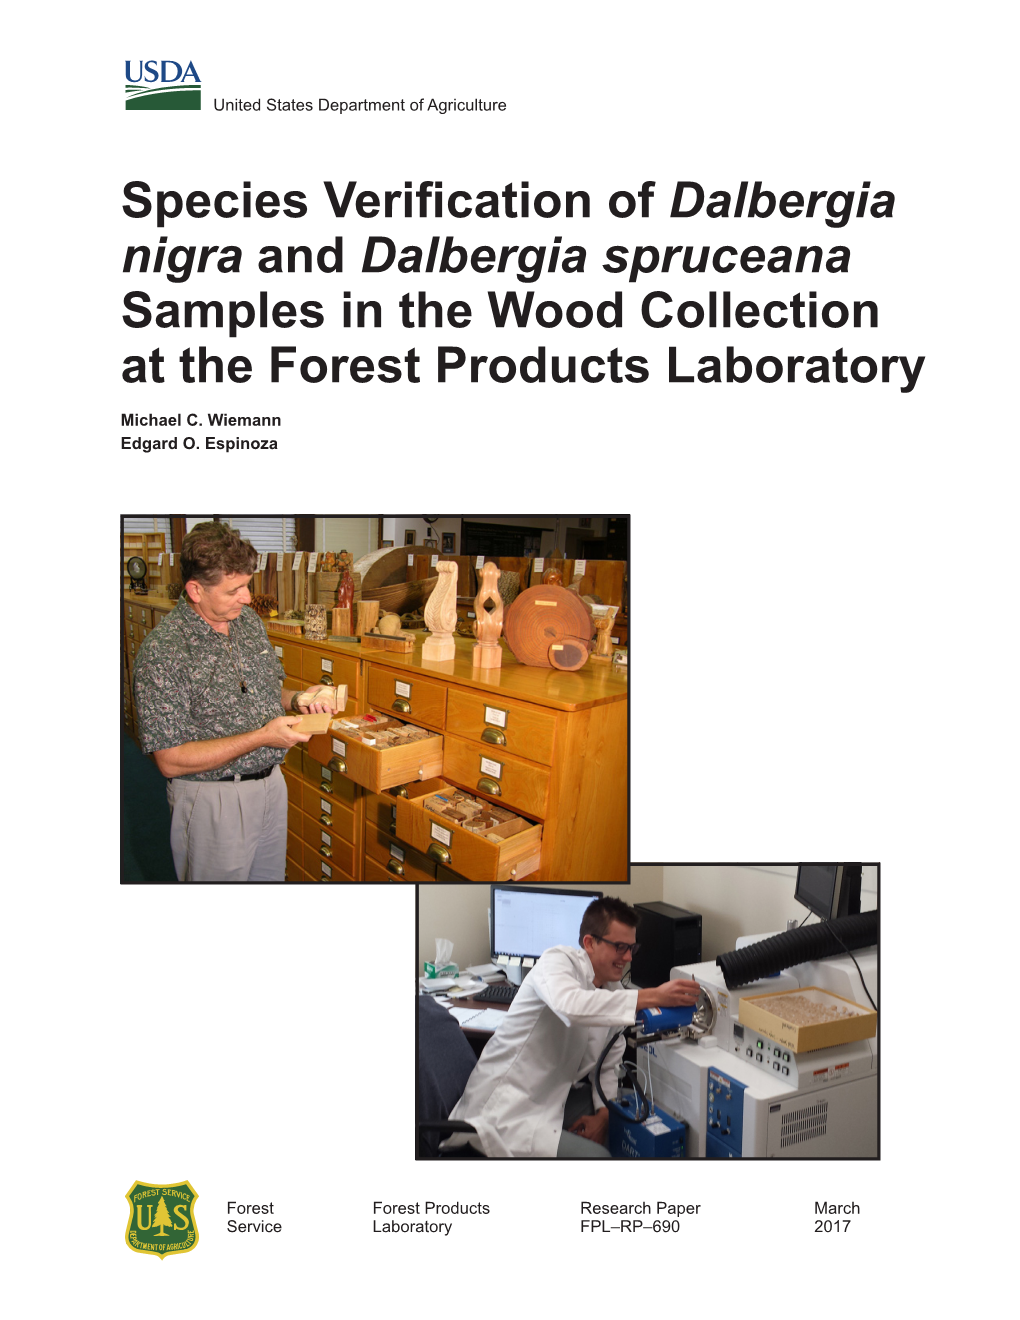 Species Verification of Dalbergia Nigra and Dalbergia Spruceana Samples in the Wood Collection of the Forest Products Laboratory